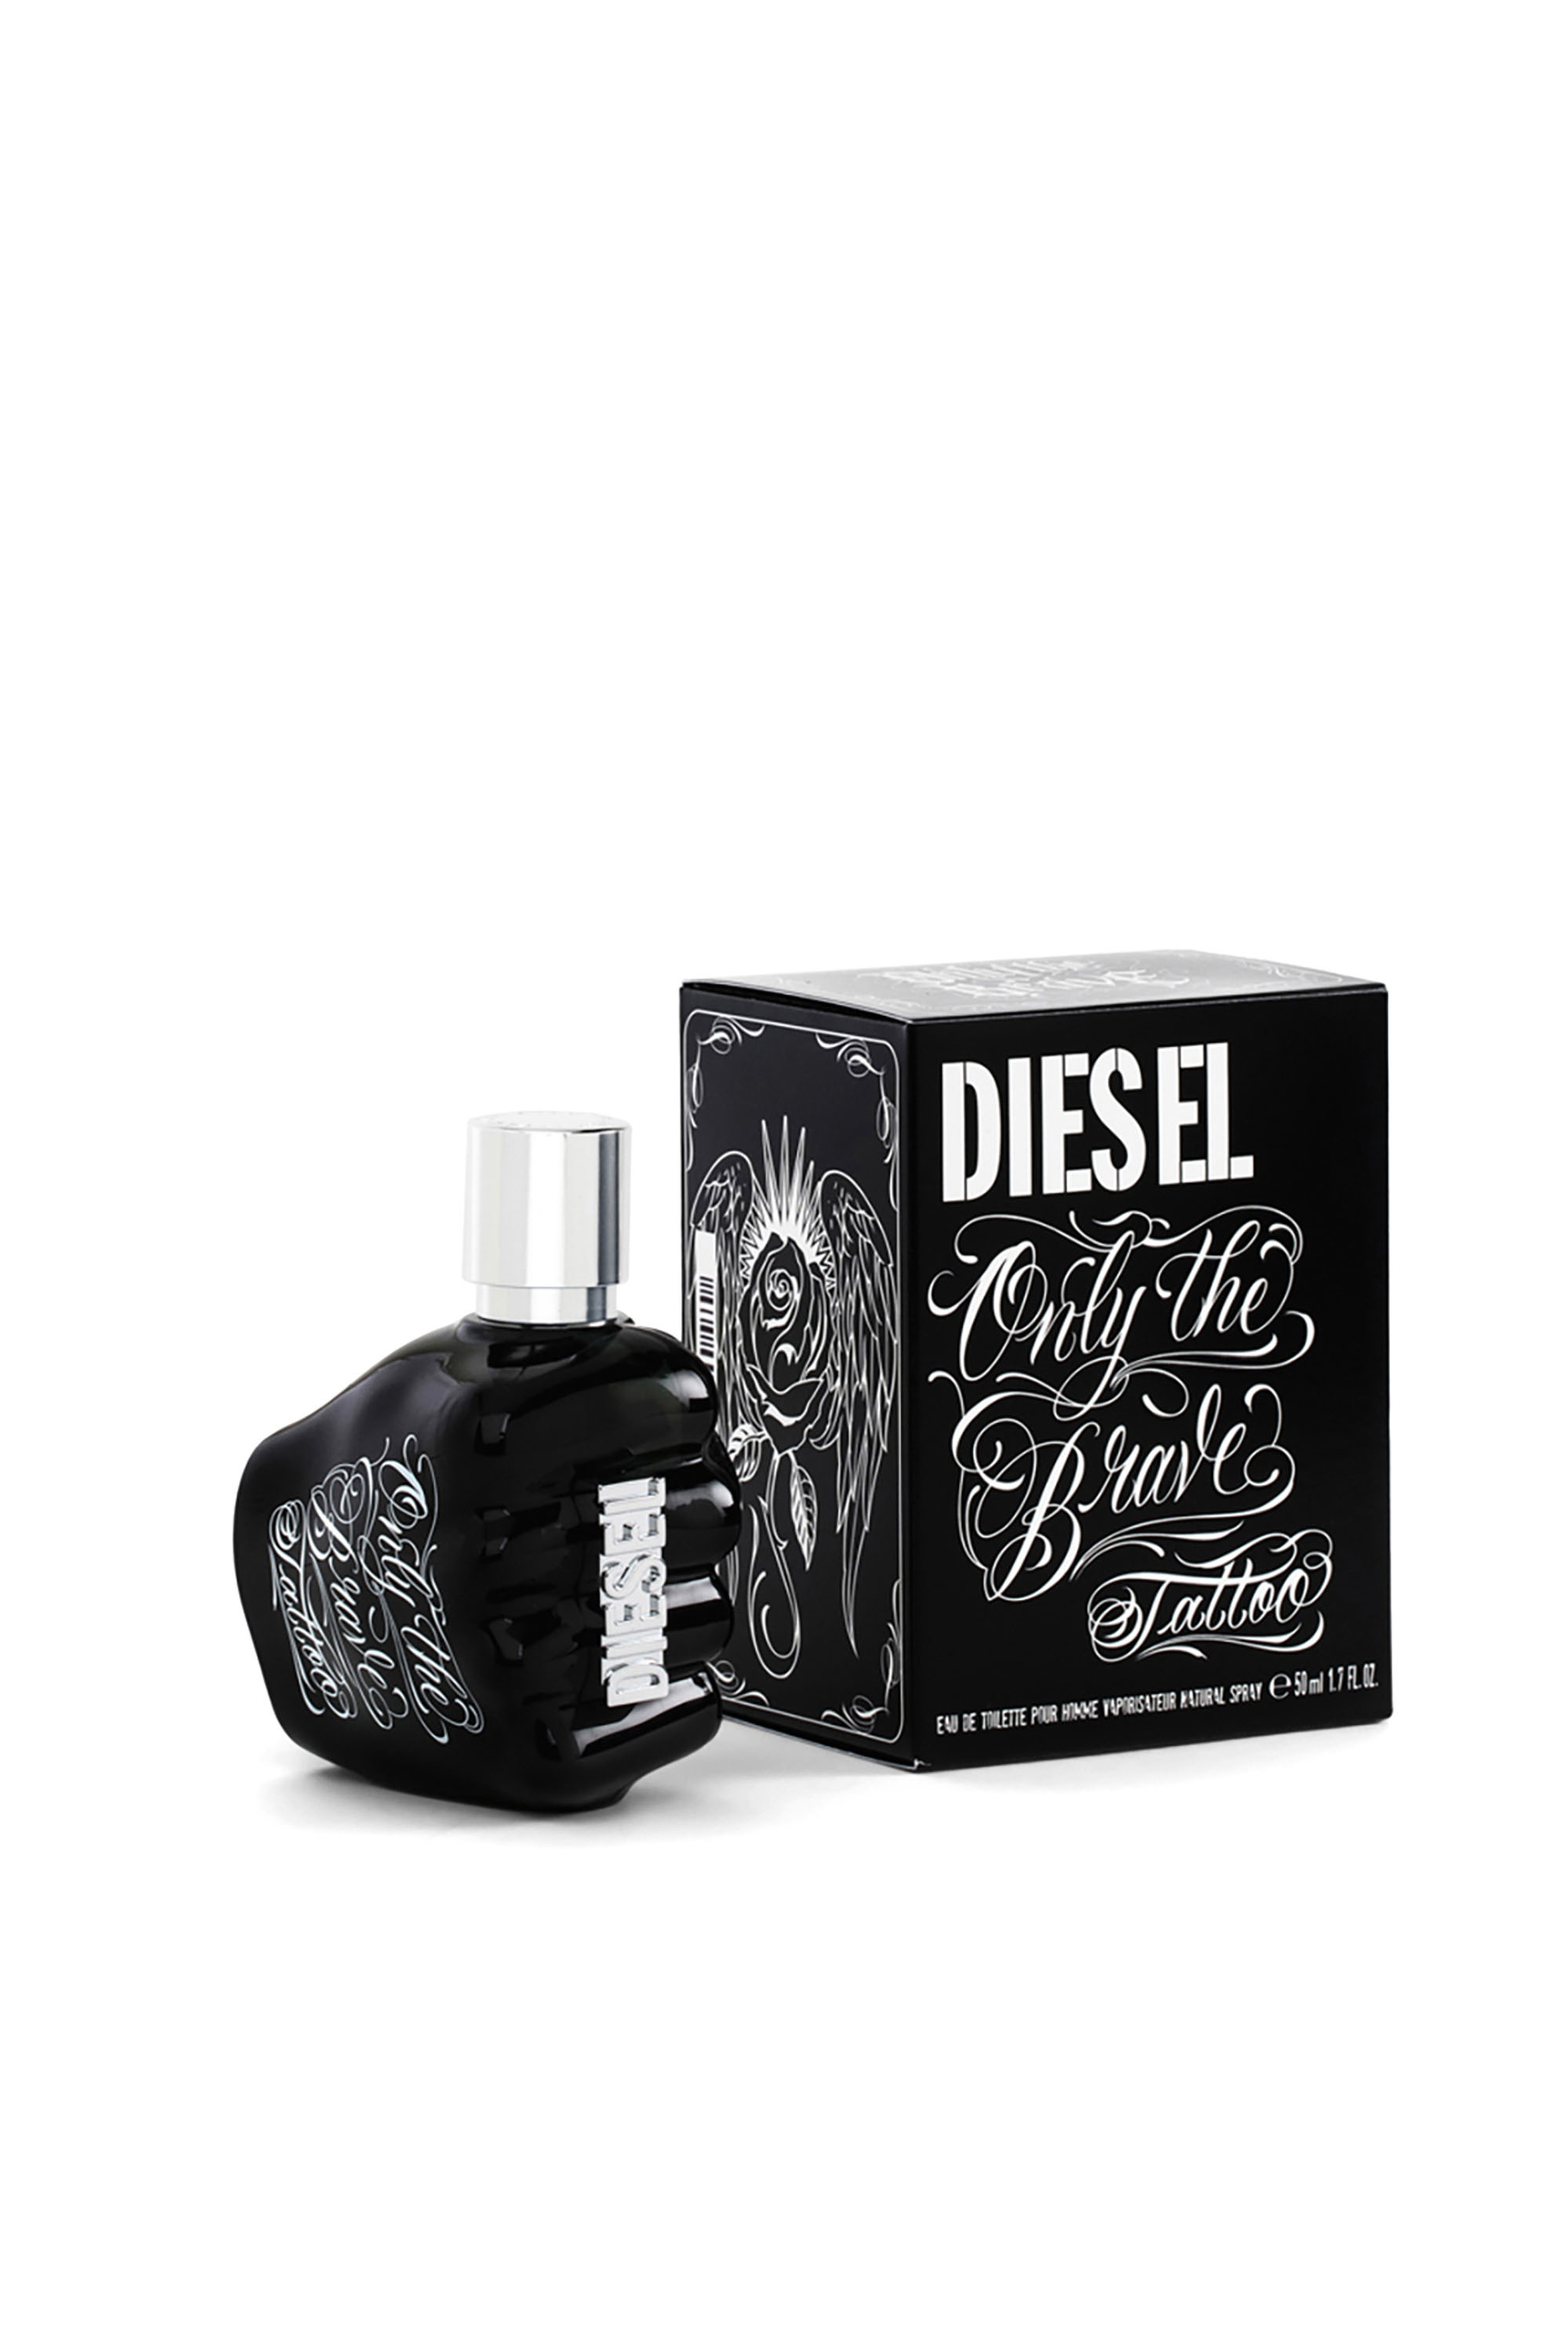 Diesel - ONLY THE BRAVE TATTOO 50 ML, Man Only the brave tattoo 50ml, eau de toilette in Black - Image 2